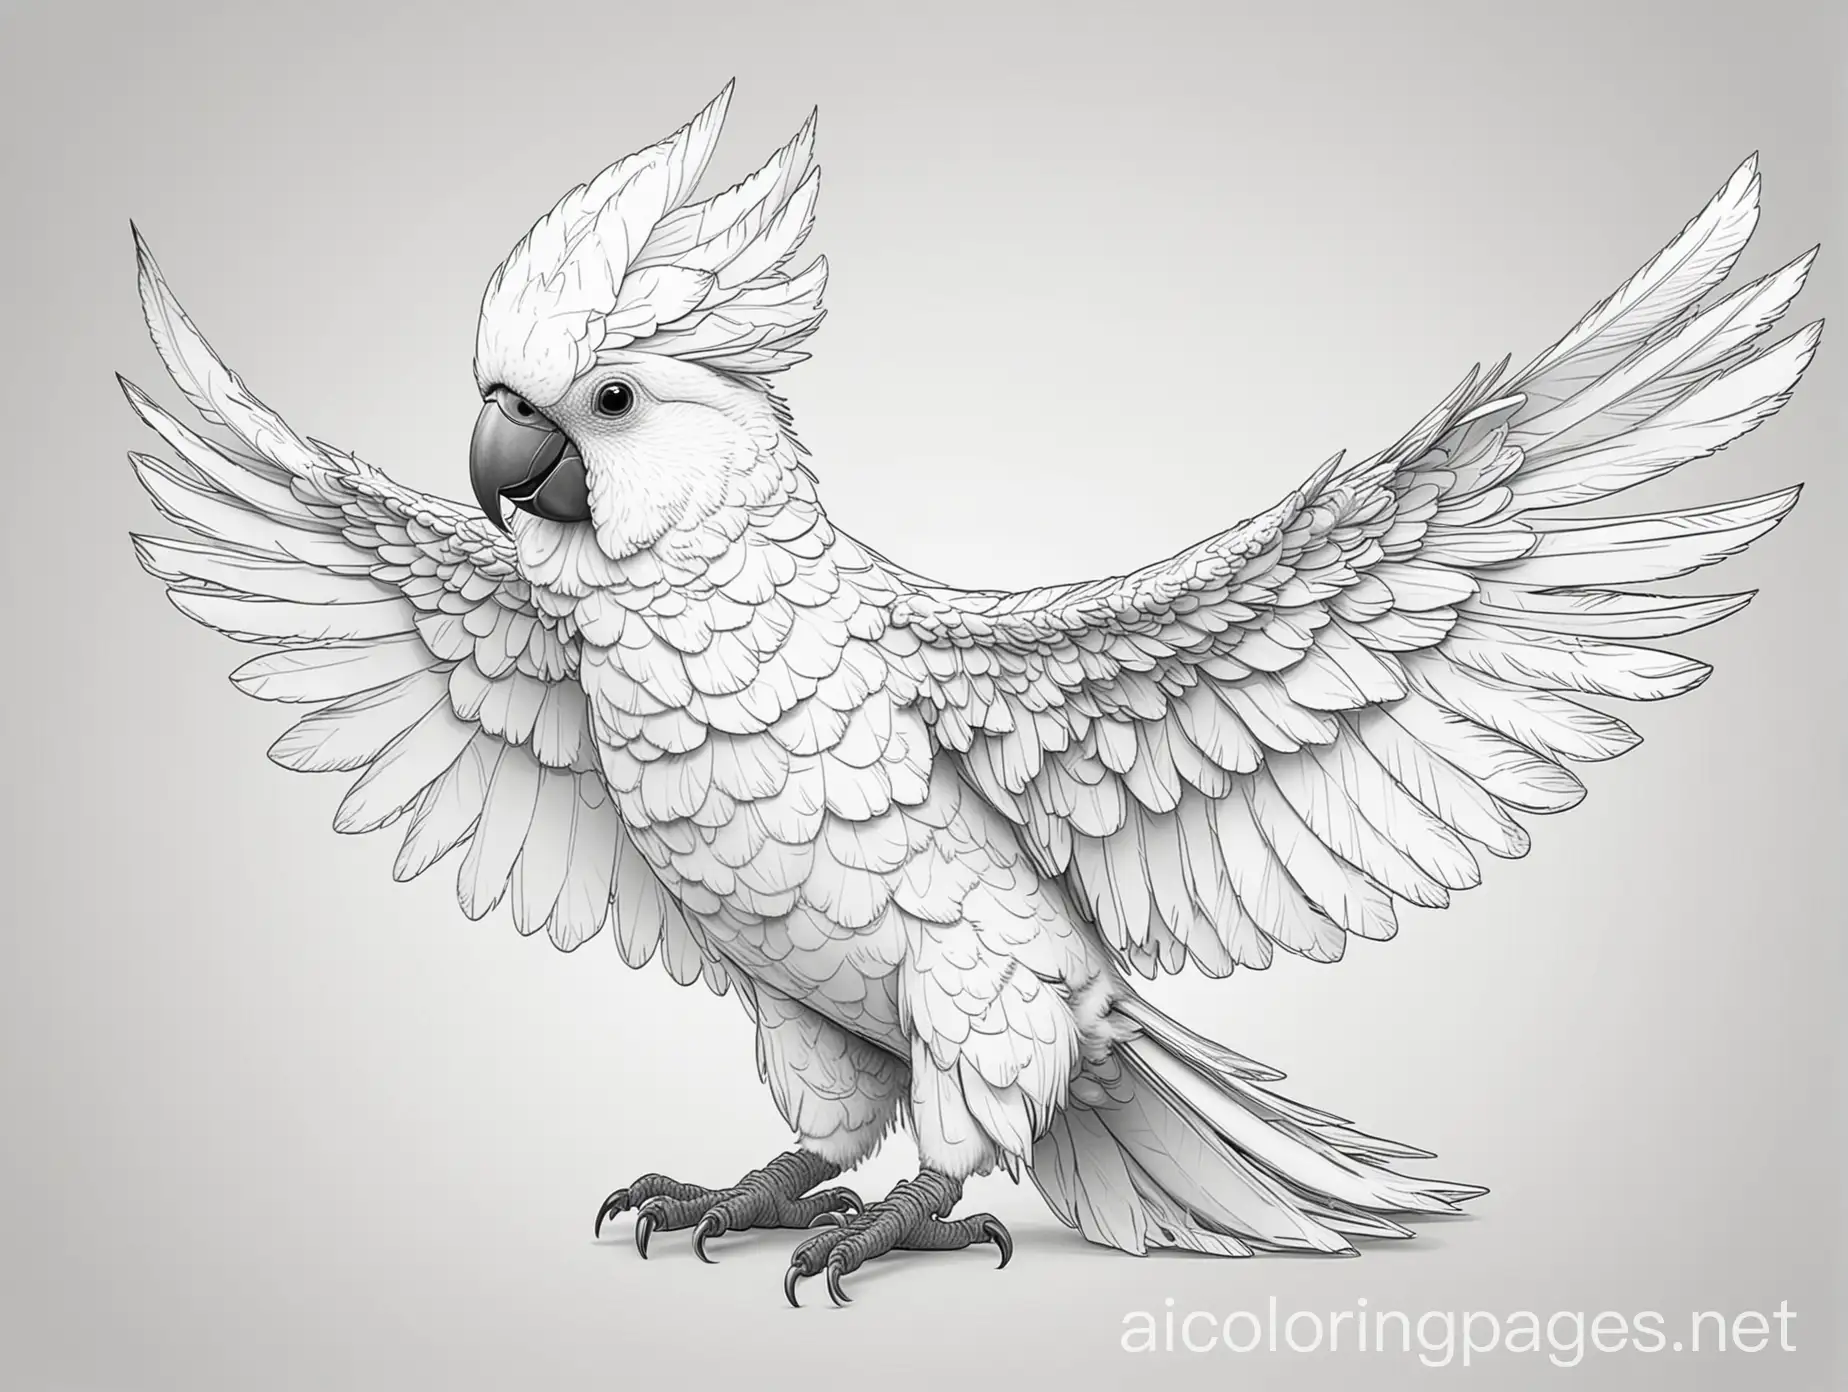 A polygon style drawing of a cockatoo with his head, feather sticking straight up in his wings out to the side like he’s flustered. Around him, our children’s toys, such as toy cars, and stuffed animals., Coloring Page, black and white, line art, white background, Simplicity, Ample White Space. The background of the coloring page is plain white to make it easy for young children to color within the lines. The outlines of all the subjects are easy to distinguish, making it simple for kids to color without too much difficulty